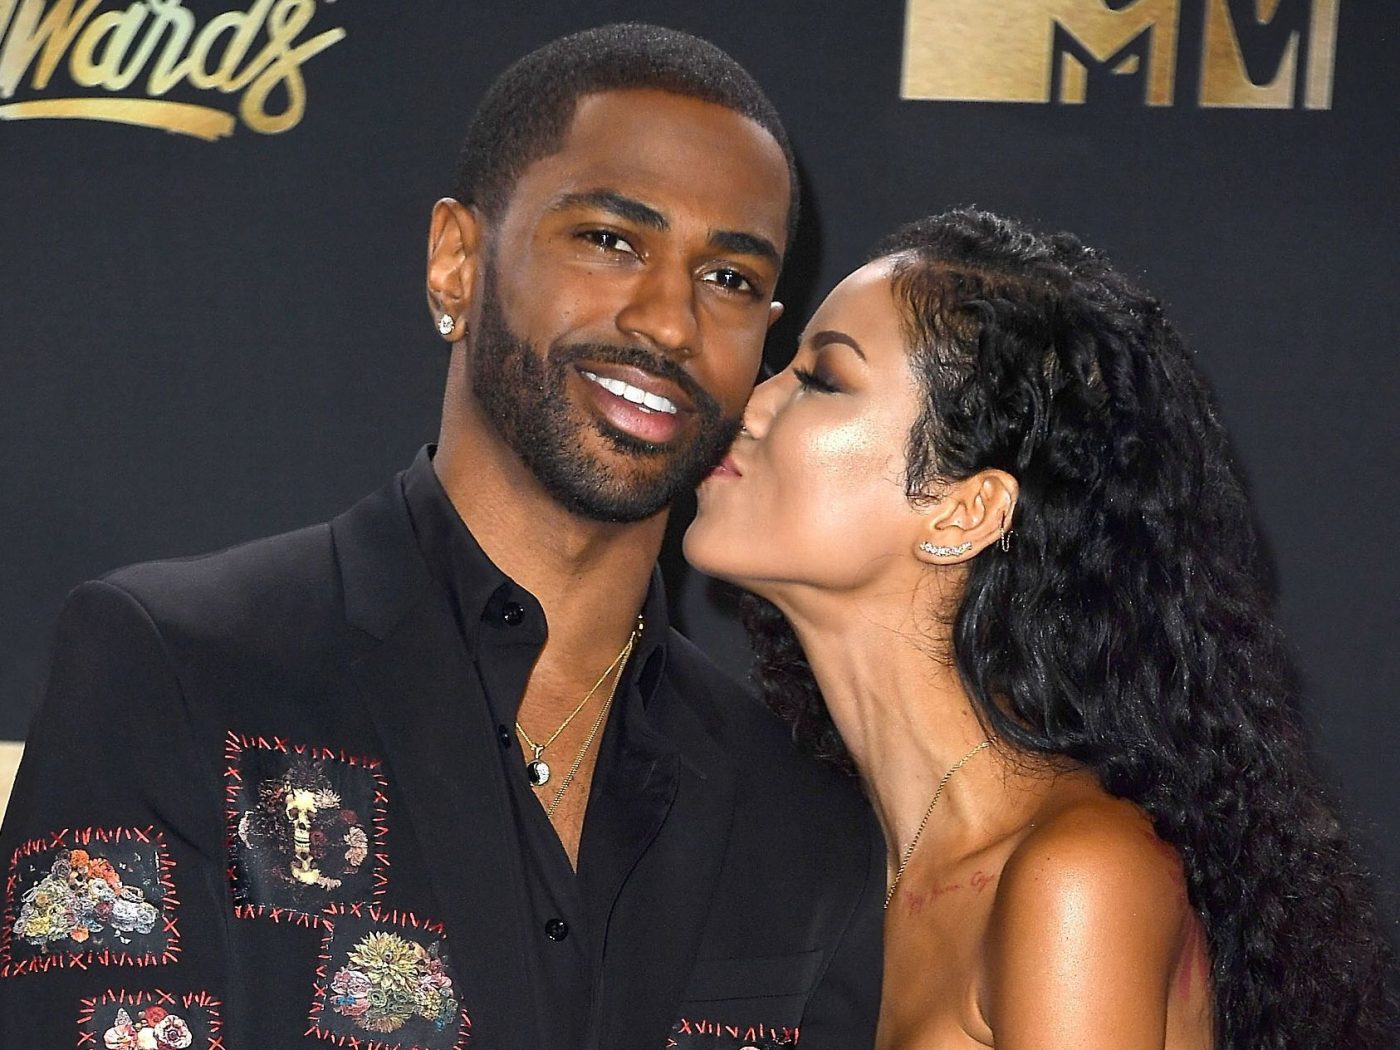 Who Is Big Sean Dating in 2021